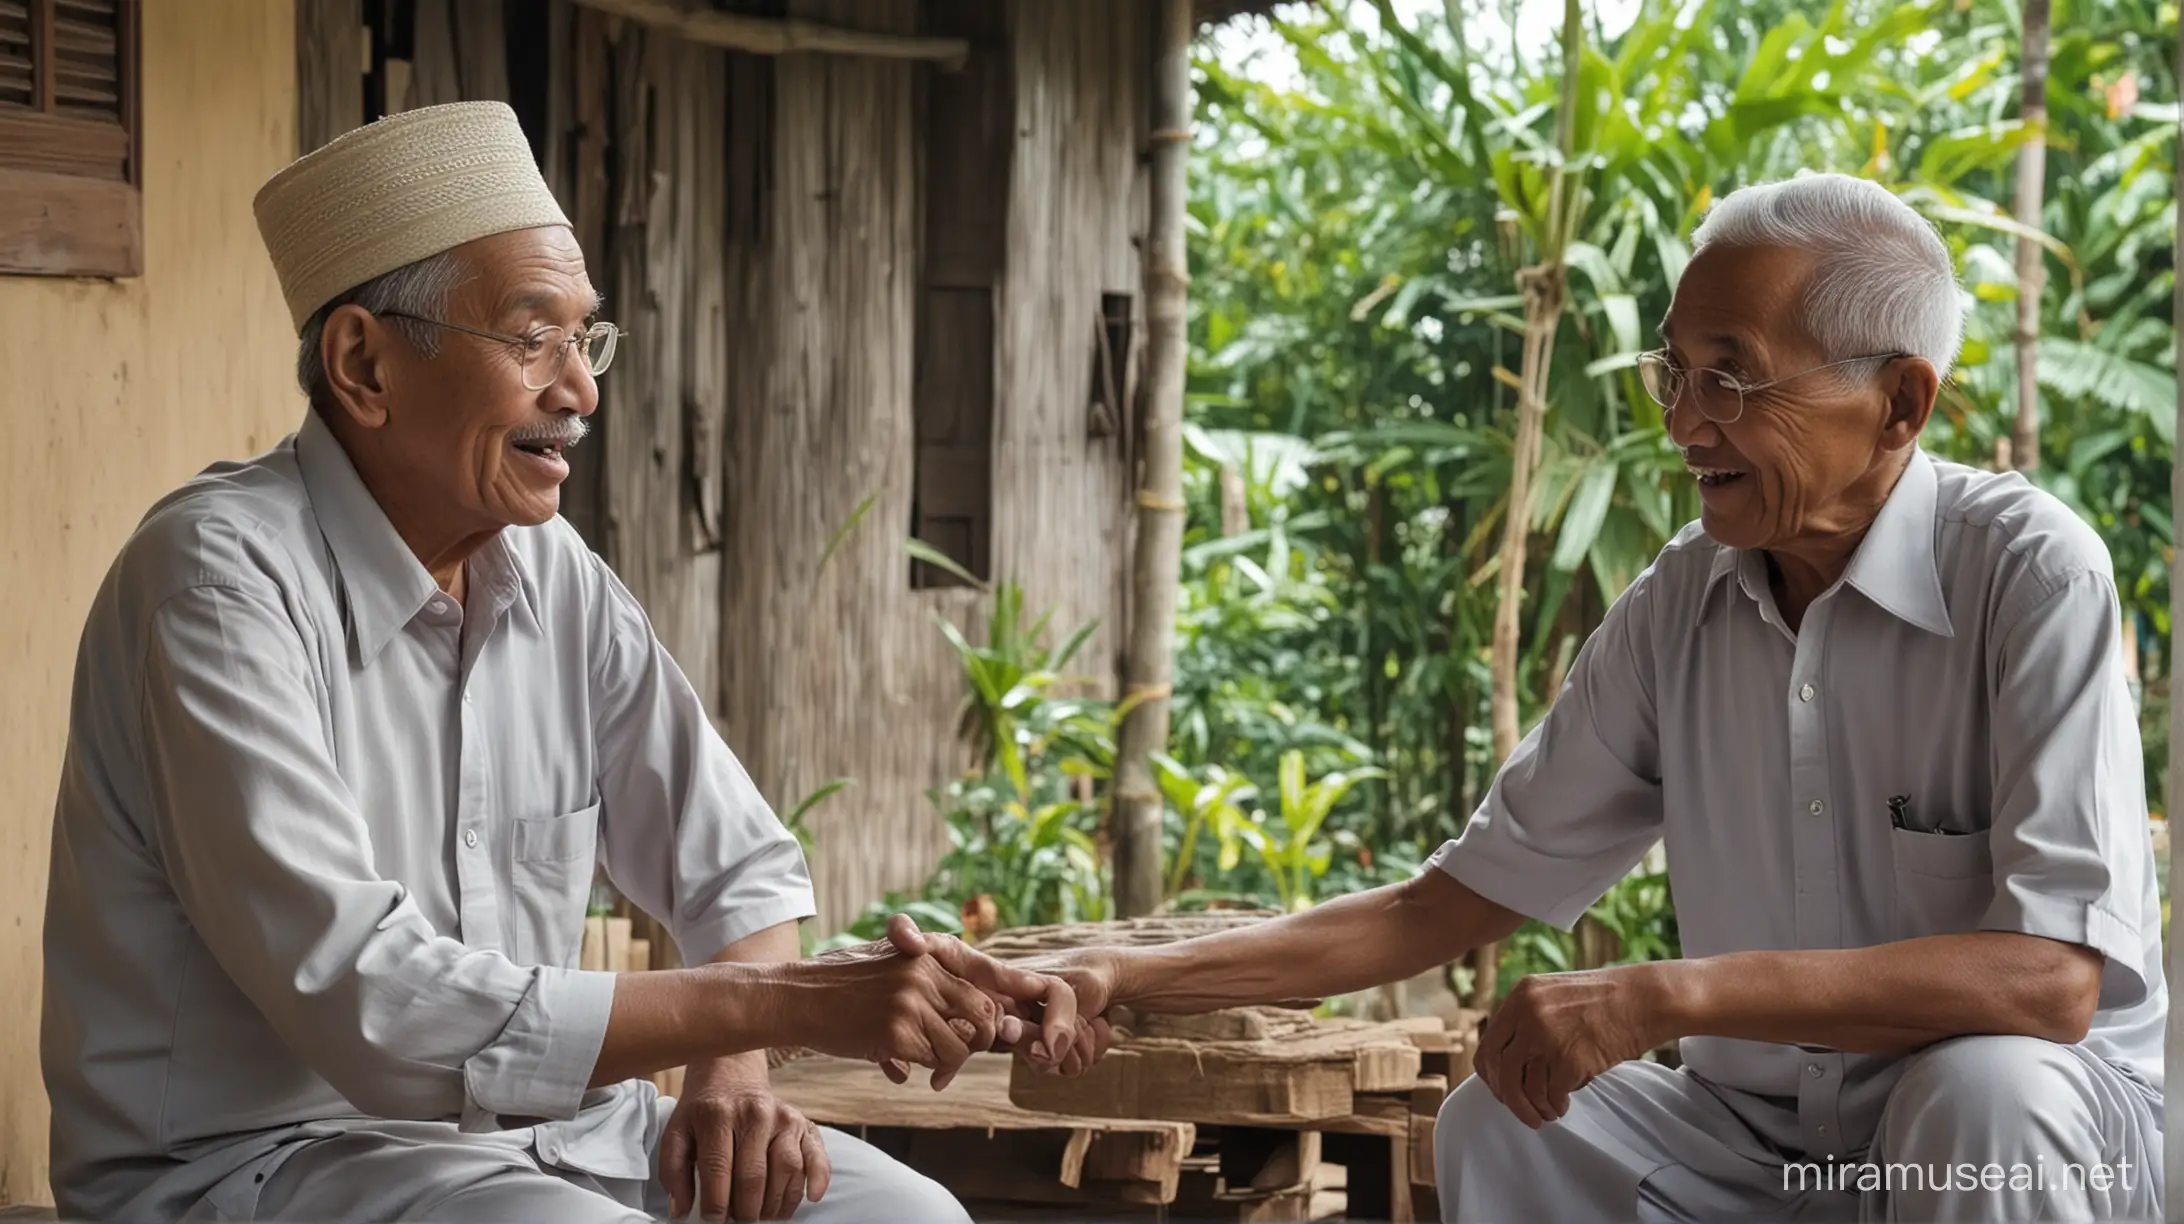  two malay old men chatting at village
home